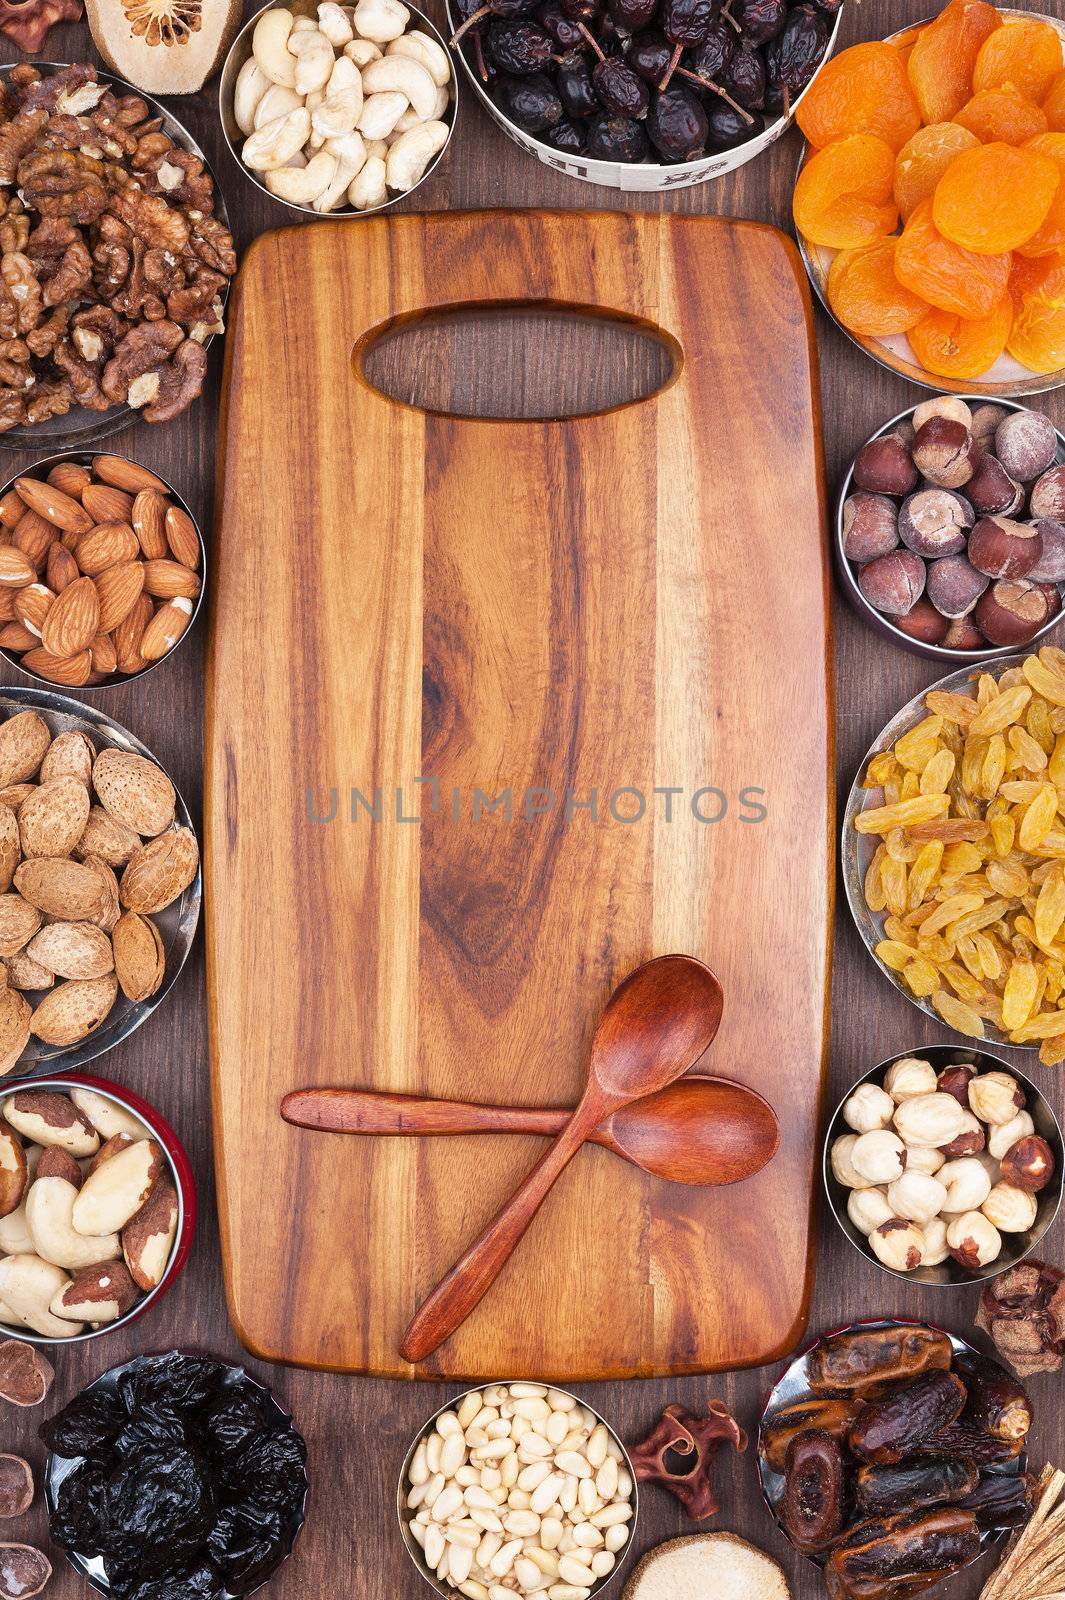 Wooden kitchen board surrounded by ingredients